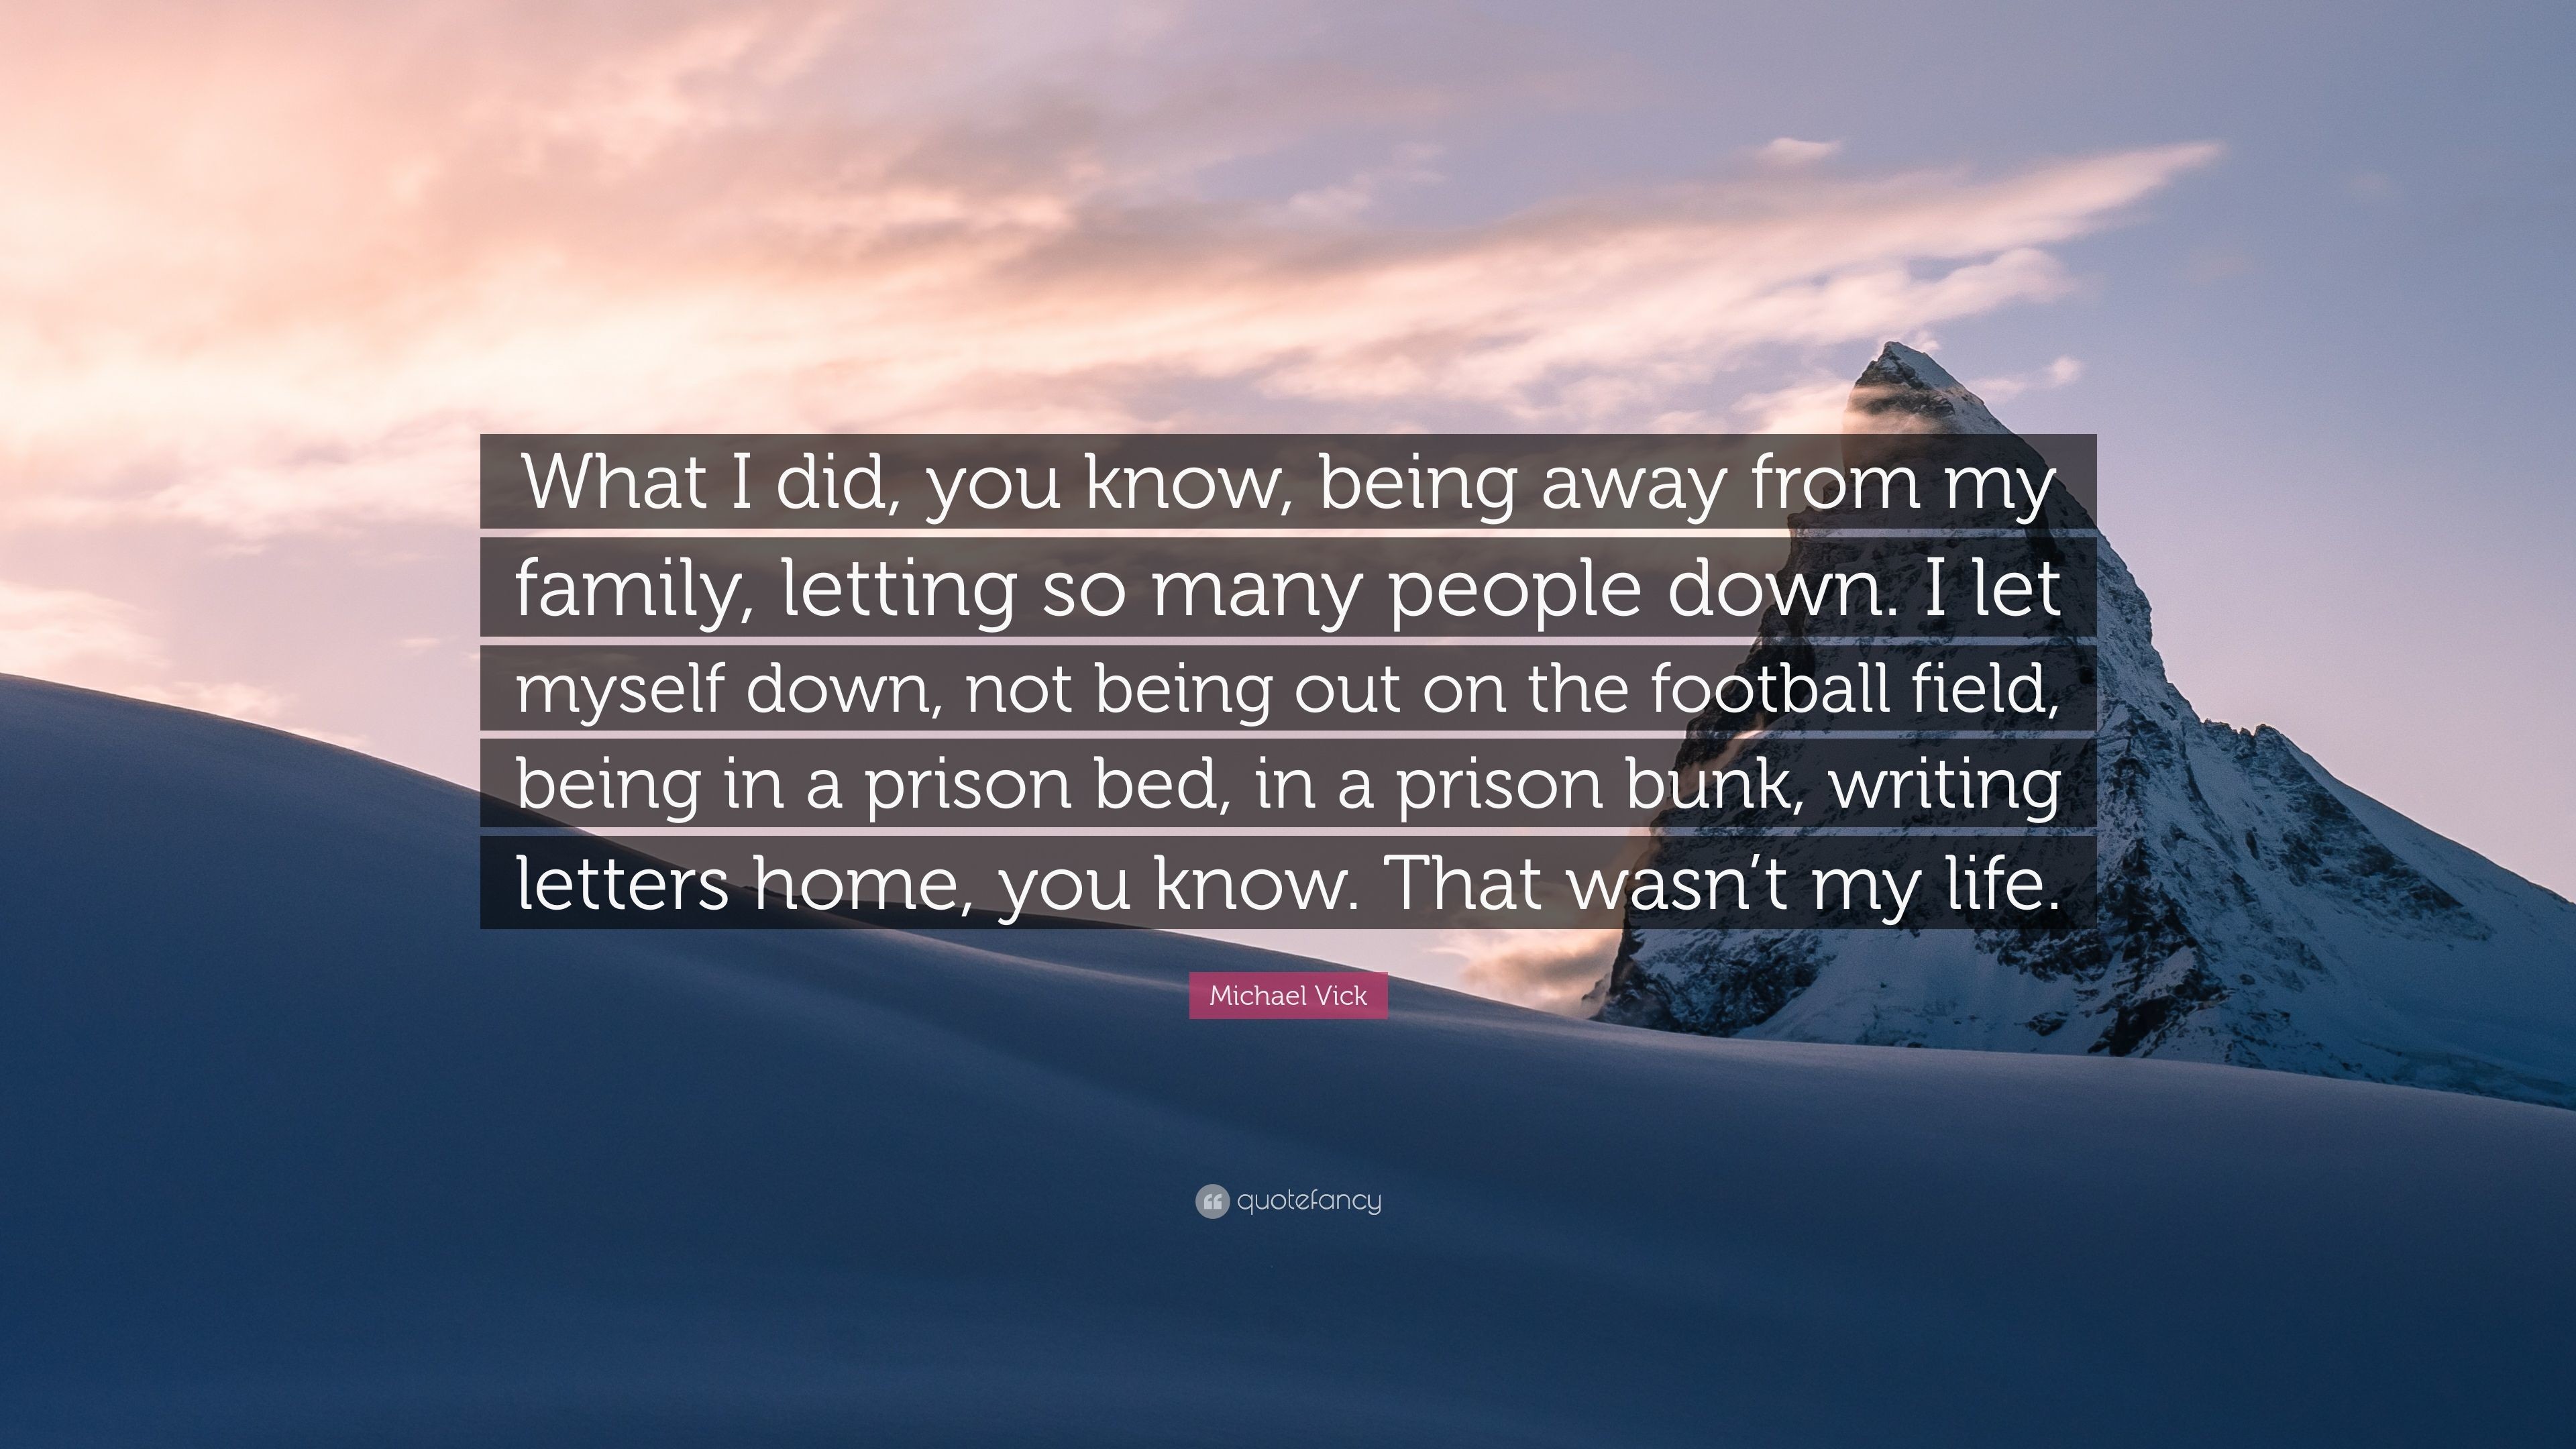 3840x2160 Michael Vick Quote: “What I did, you know, being away from my